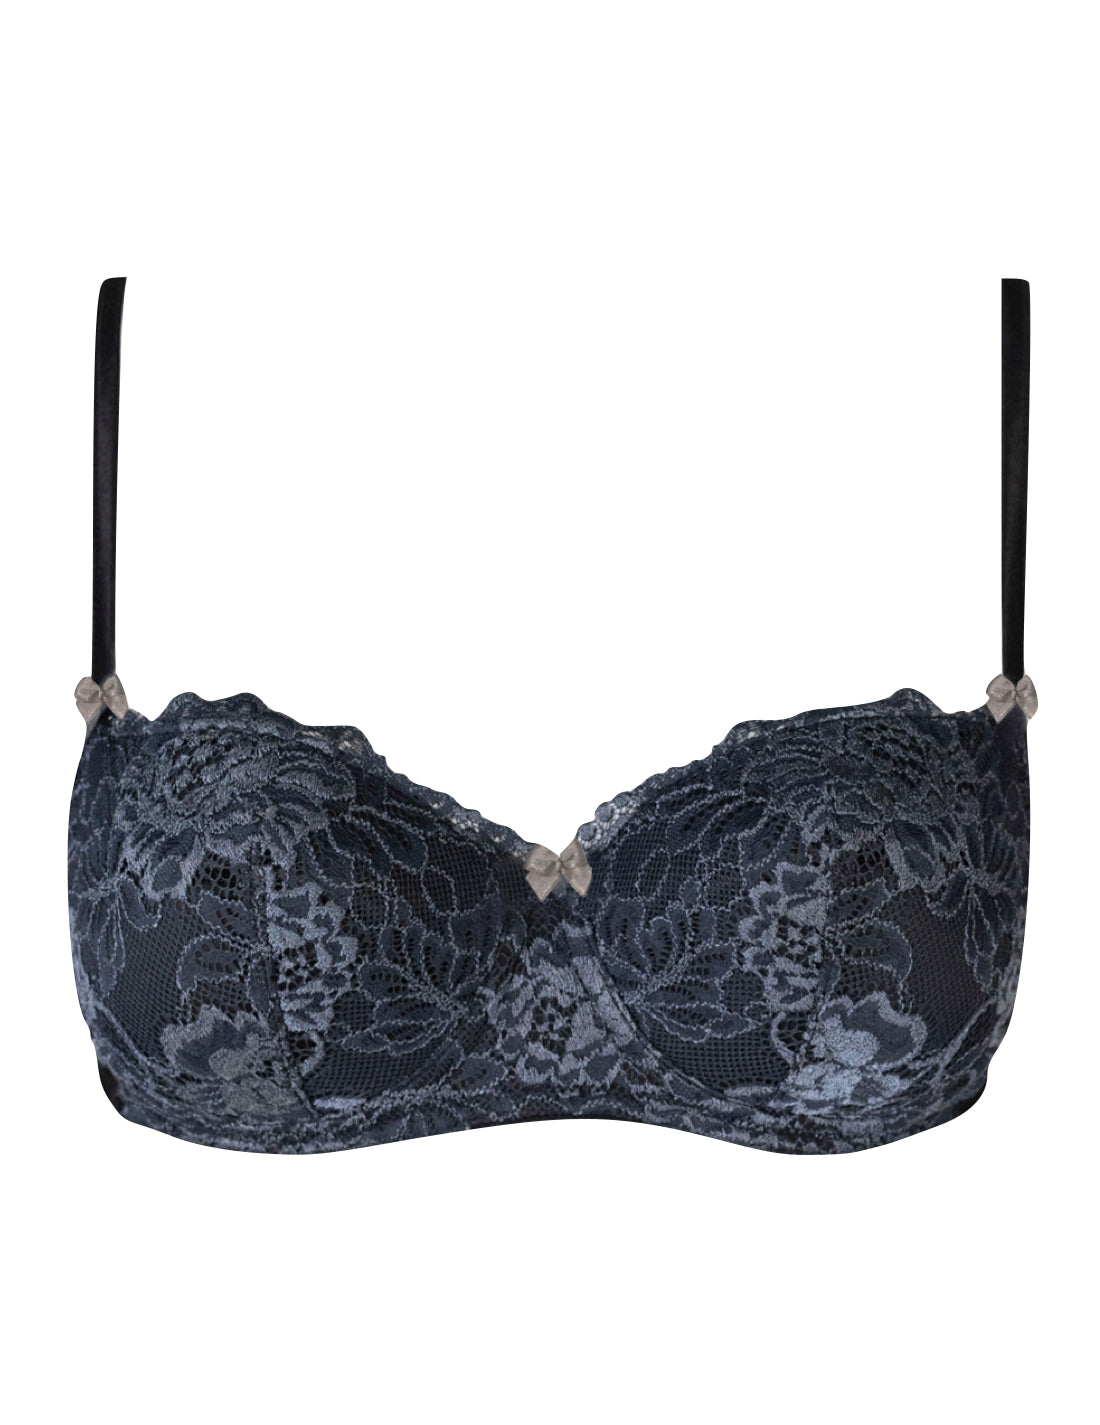 Mimi Holliday Tilt-a-Whirl Maxi Bra Review: 32FF - Big Cup Little Cup